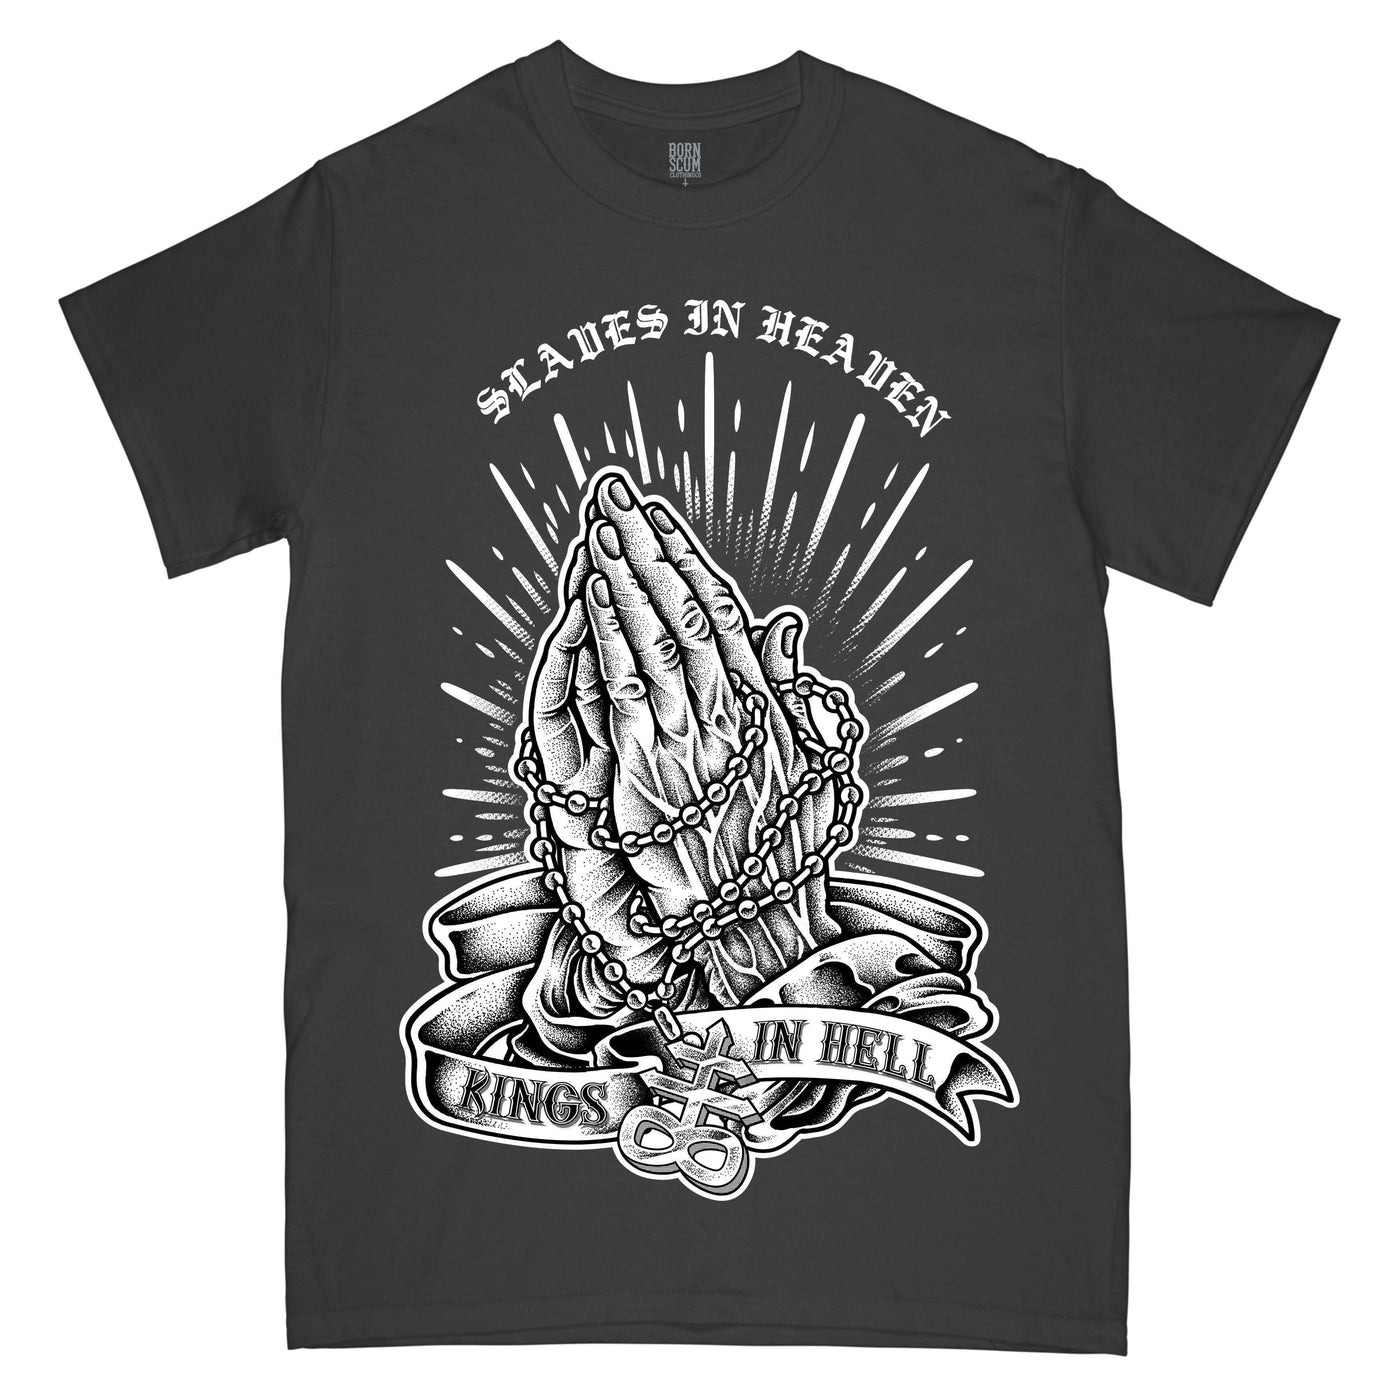 KINGS IN HELL T-SHIRT - Born Scum Clothing Co